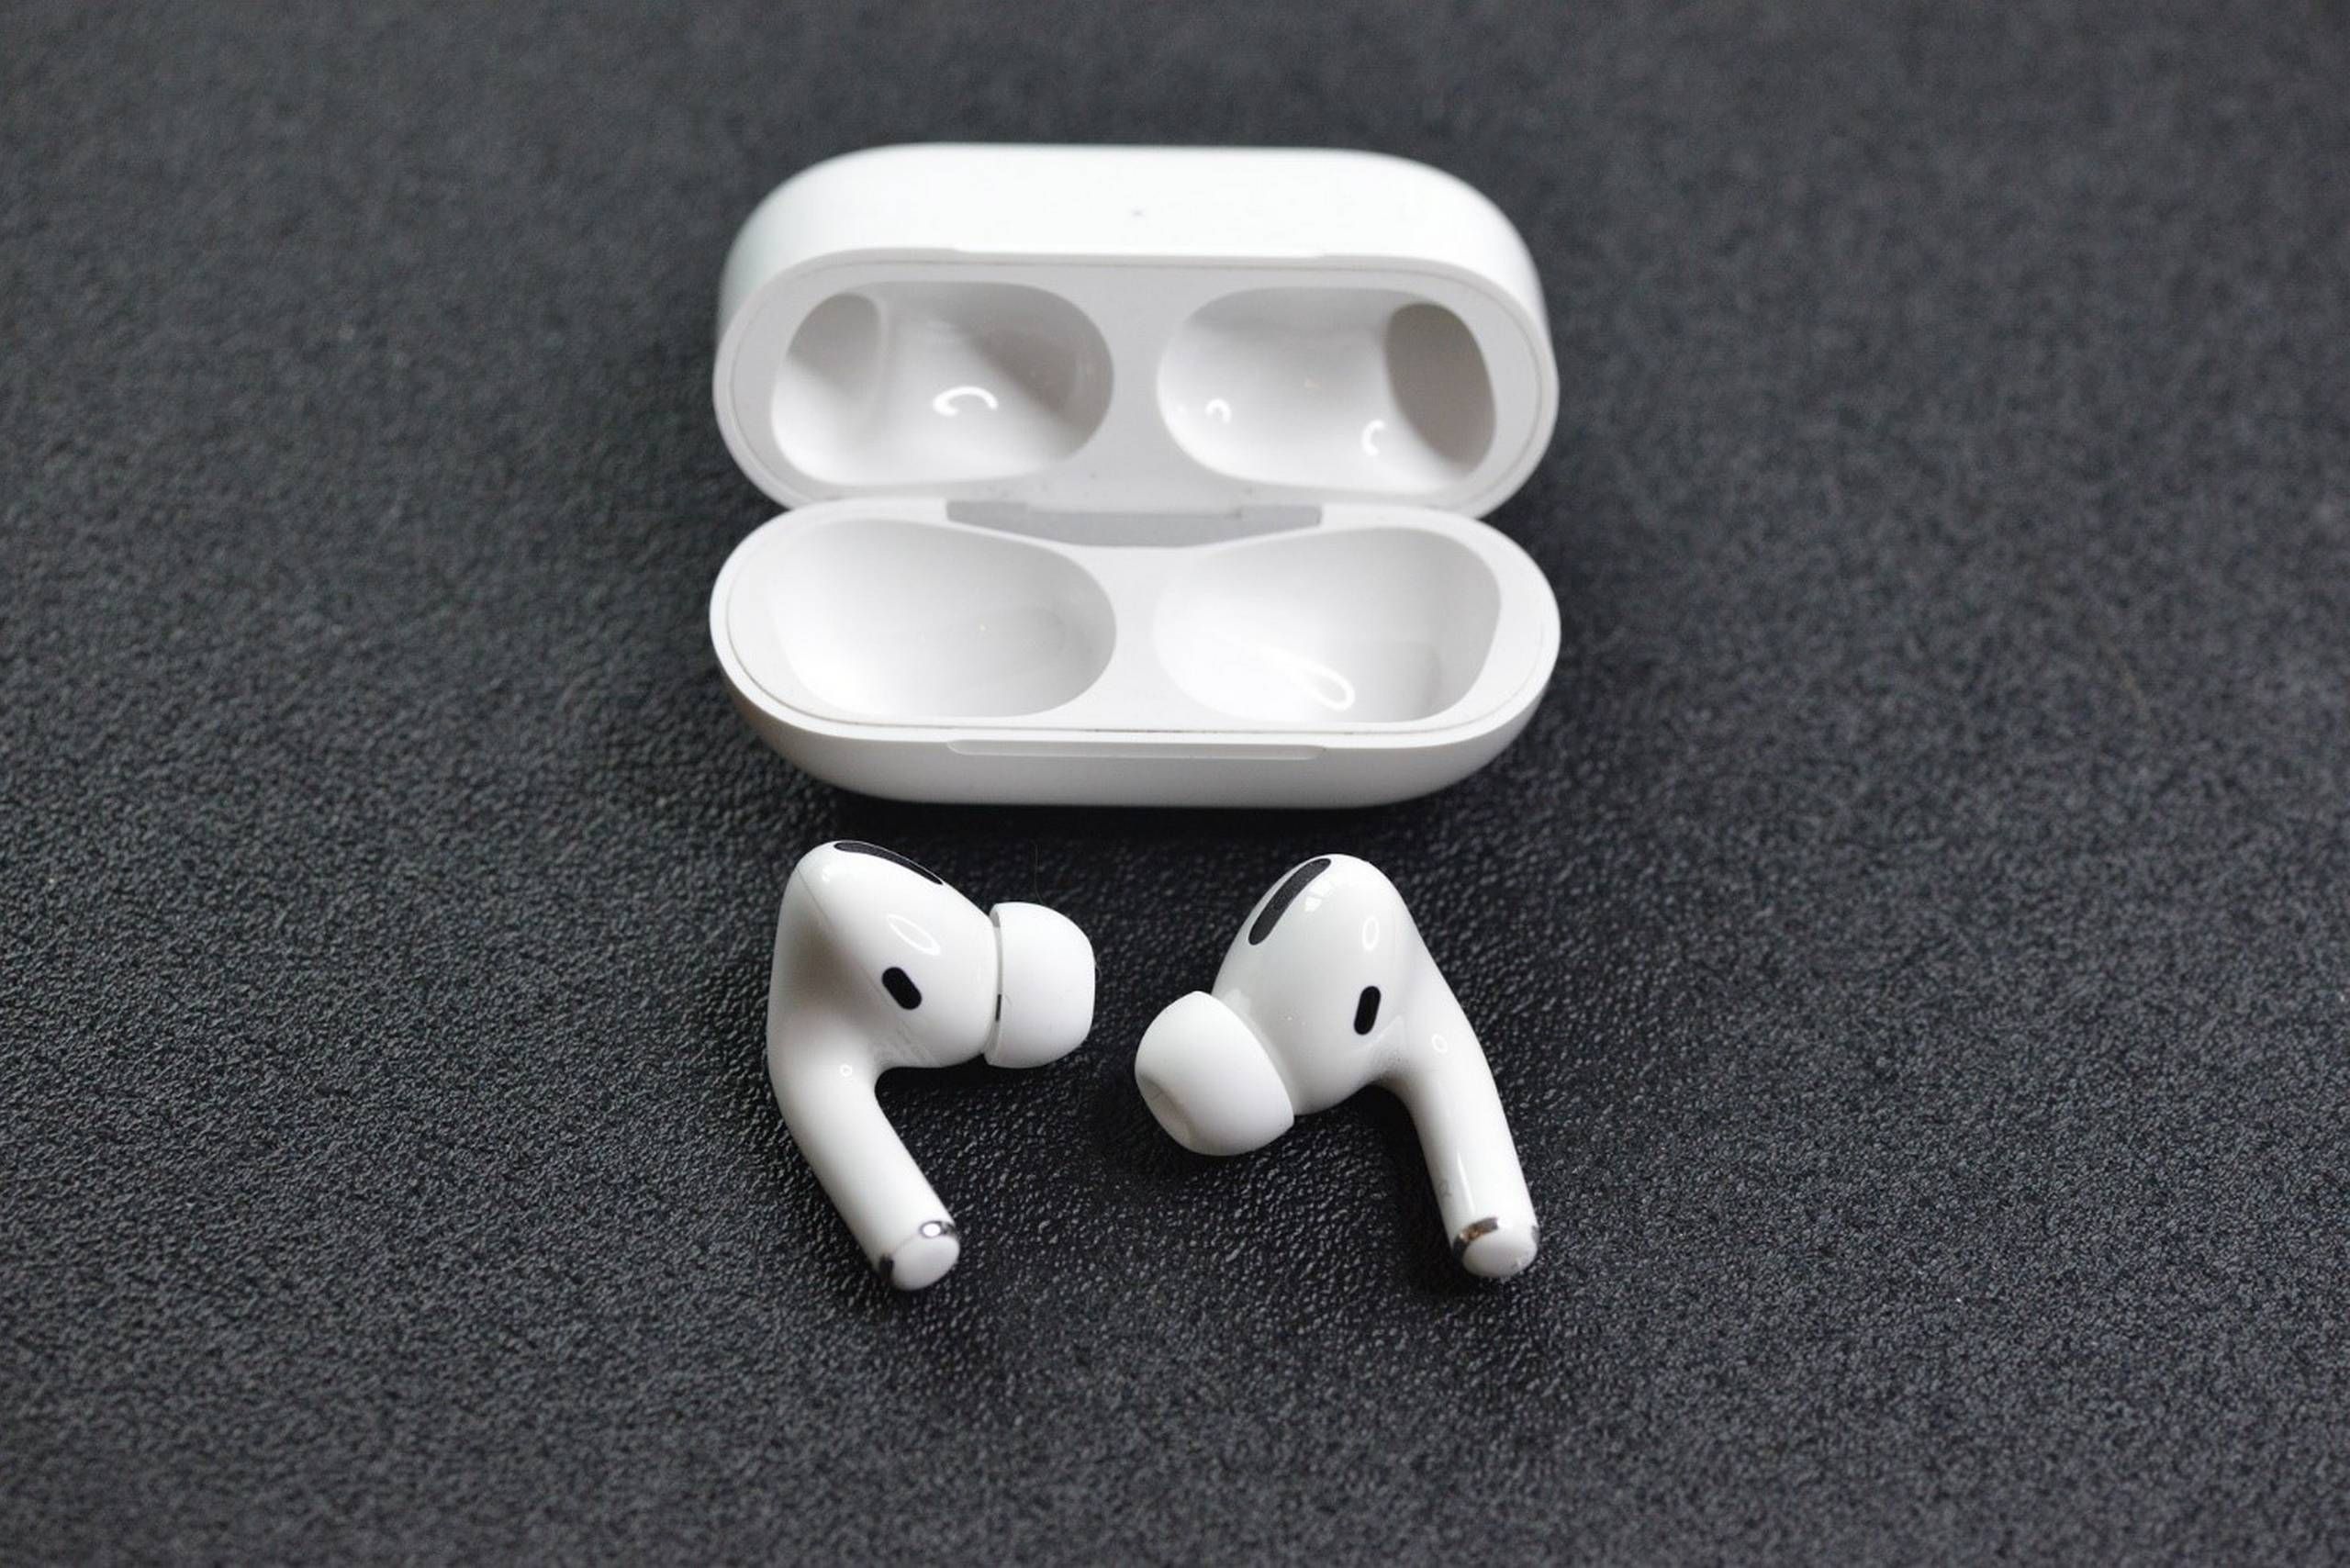 Airpods 13